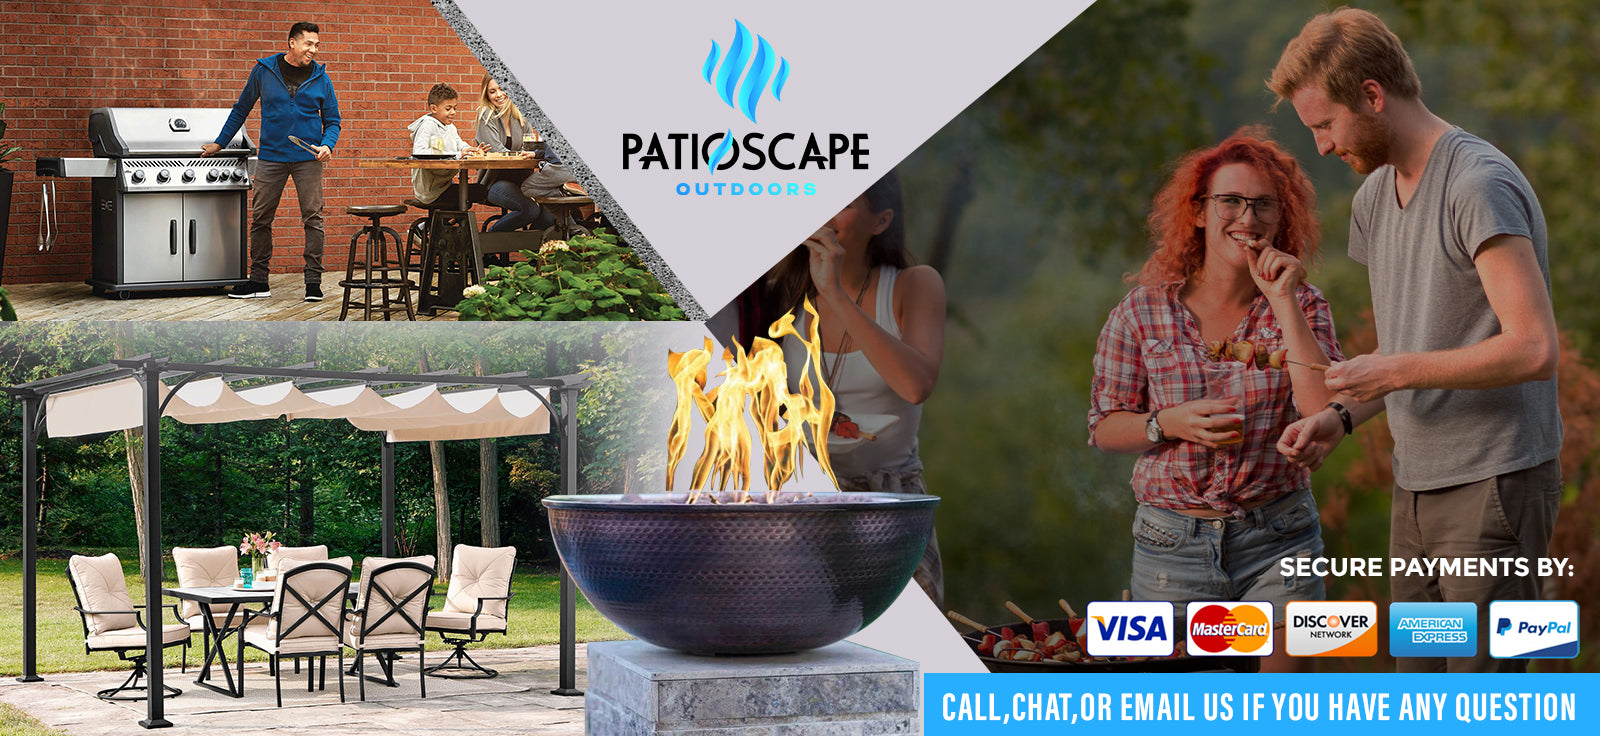 Patioscape Outdoors Banner Image that features a pergola and a dining set, a man holding the hood handle of a grill, and a man and lady trying food